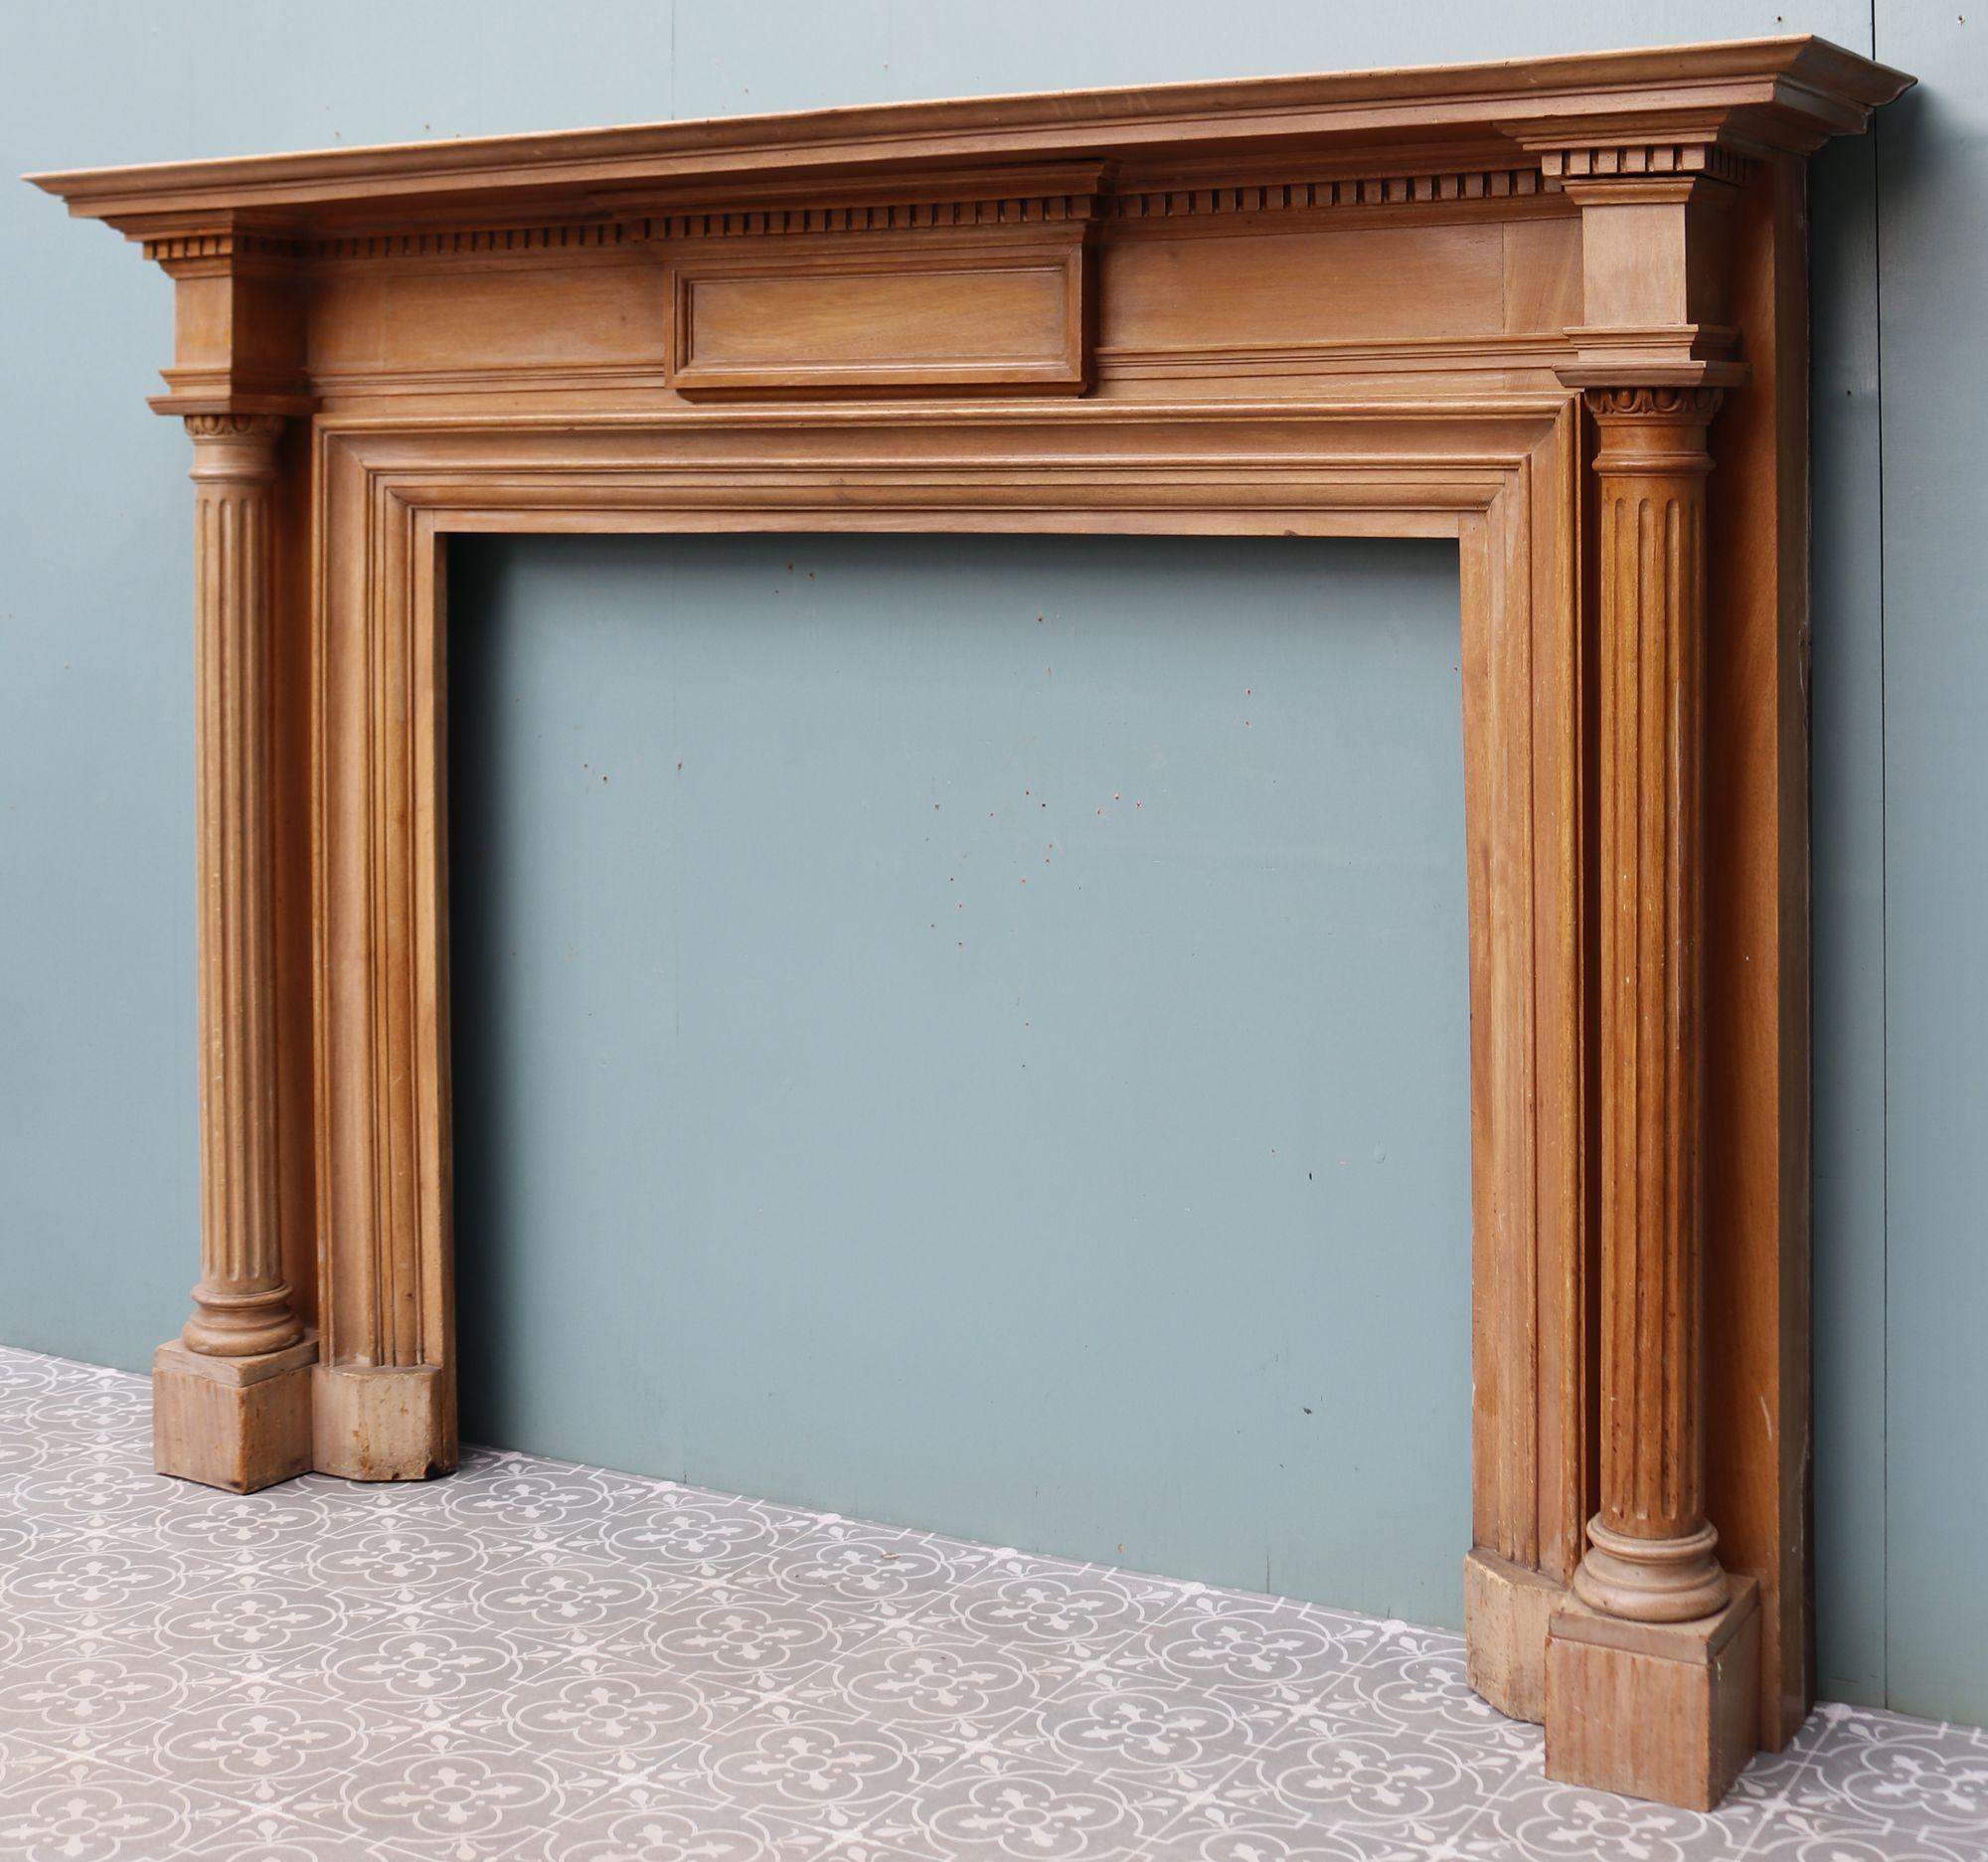 Neoclassical Columned Timber Chimney Piece In Good Condition For Sale In Wormelow, Herefordshire